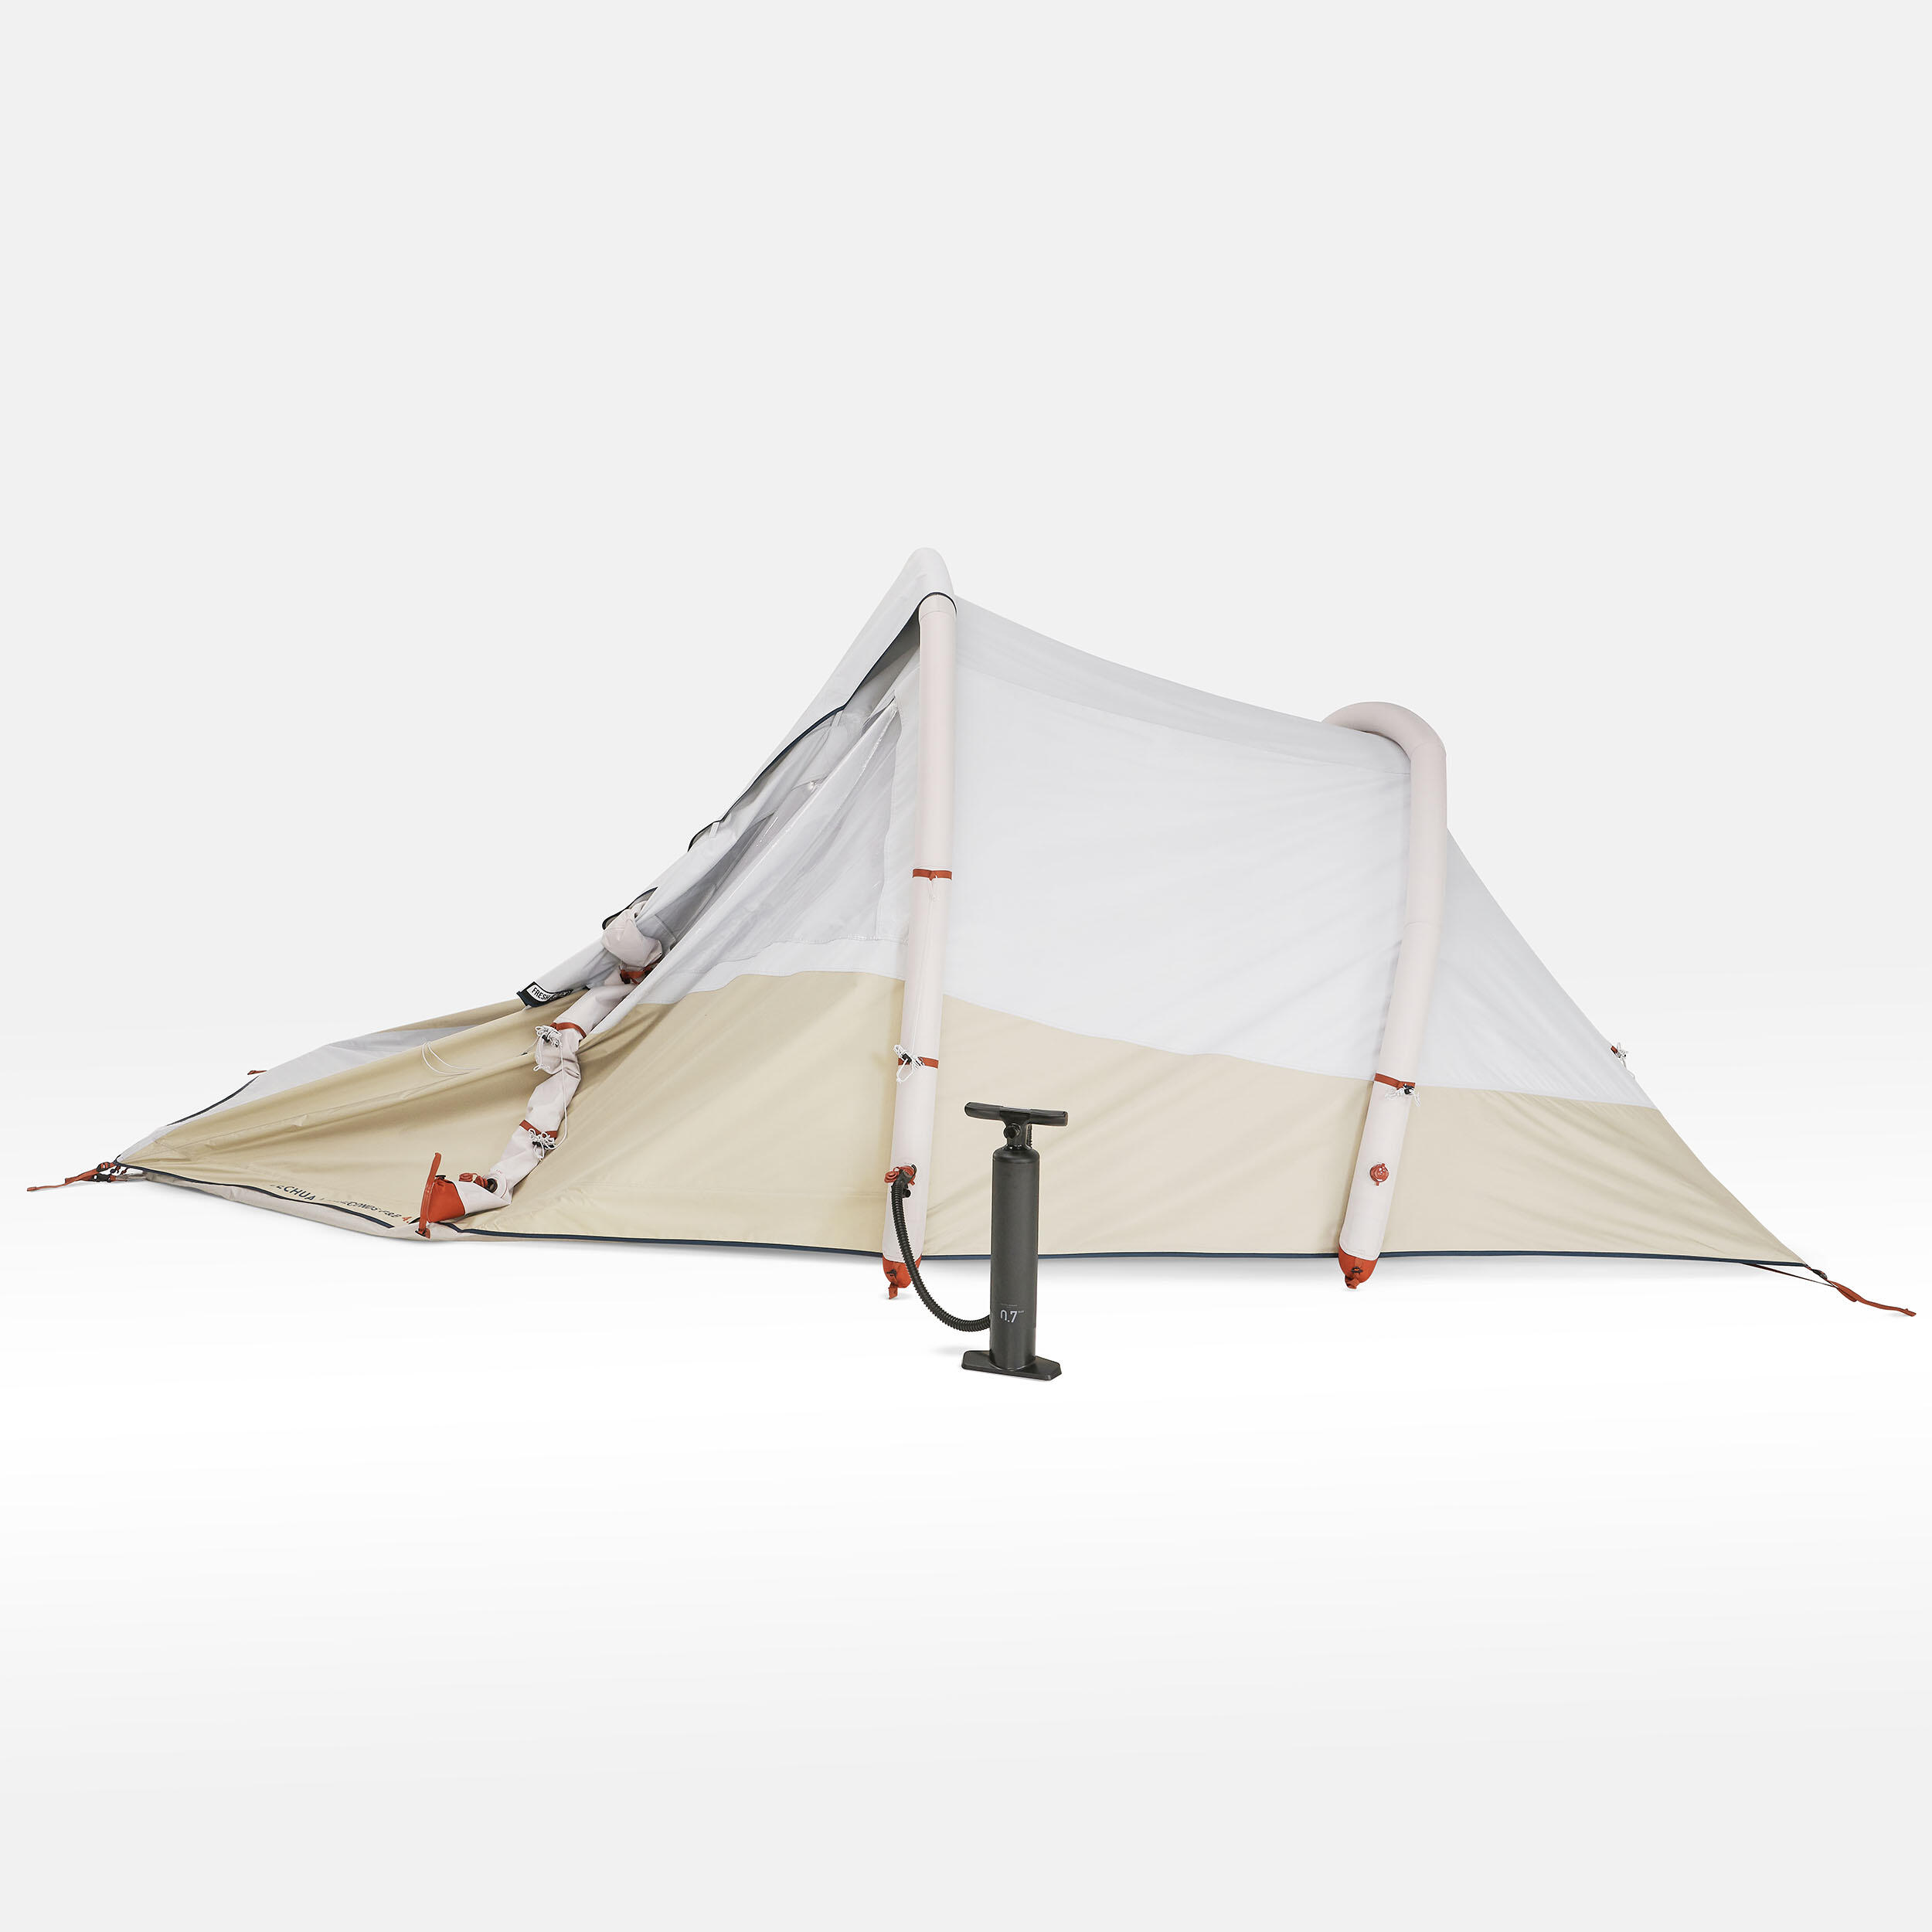 4 Man Inflatable Blackout Tent - Air Seconds 4.1 F&B 29/32